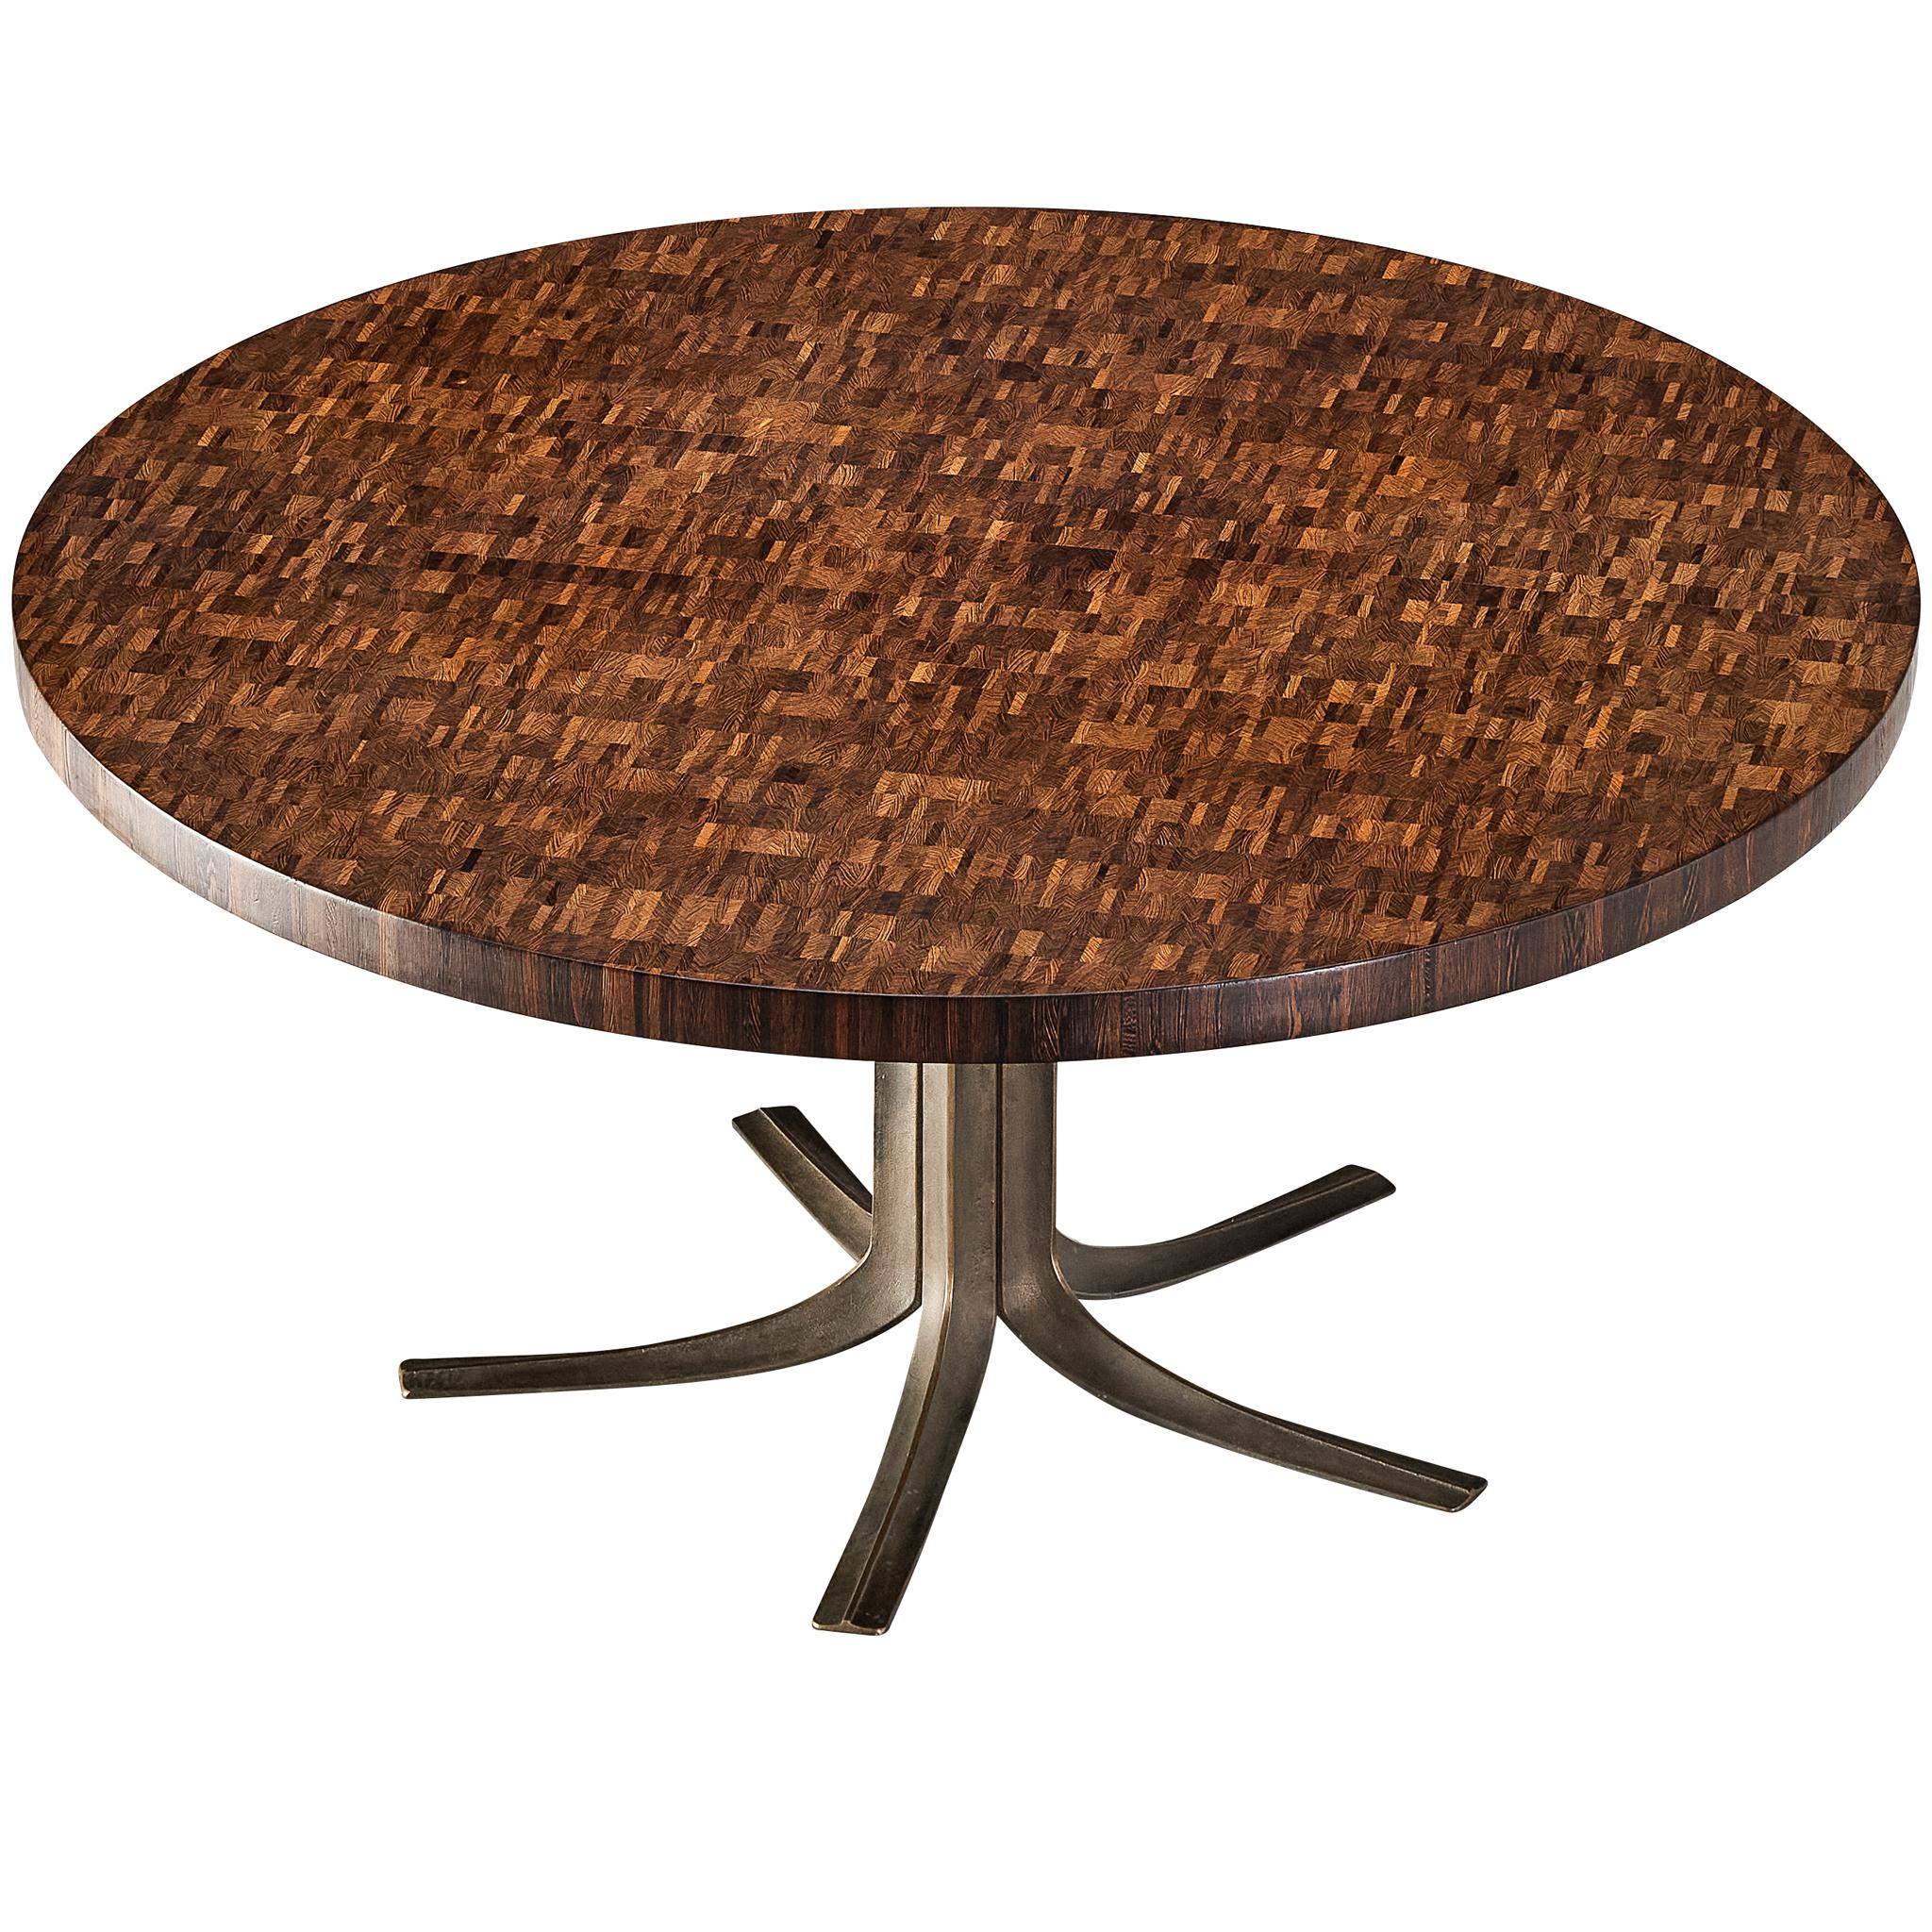 Jules Wabbes Center Table with Tulip Base in Wengé and Bronze 